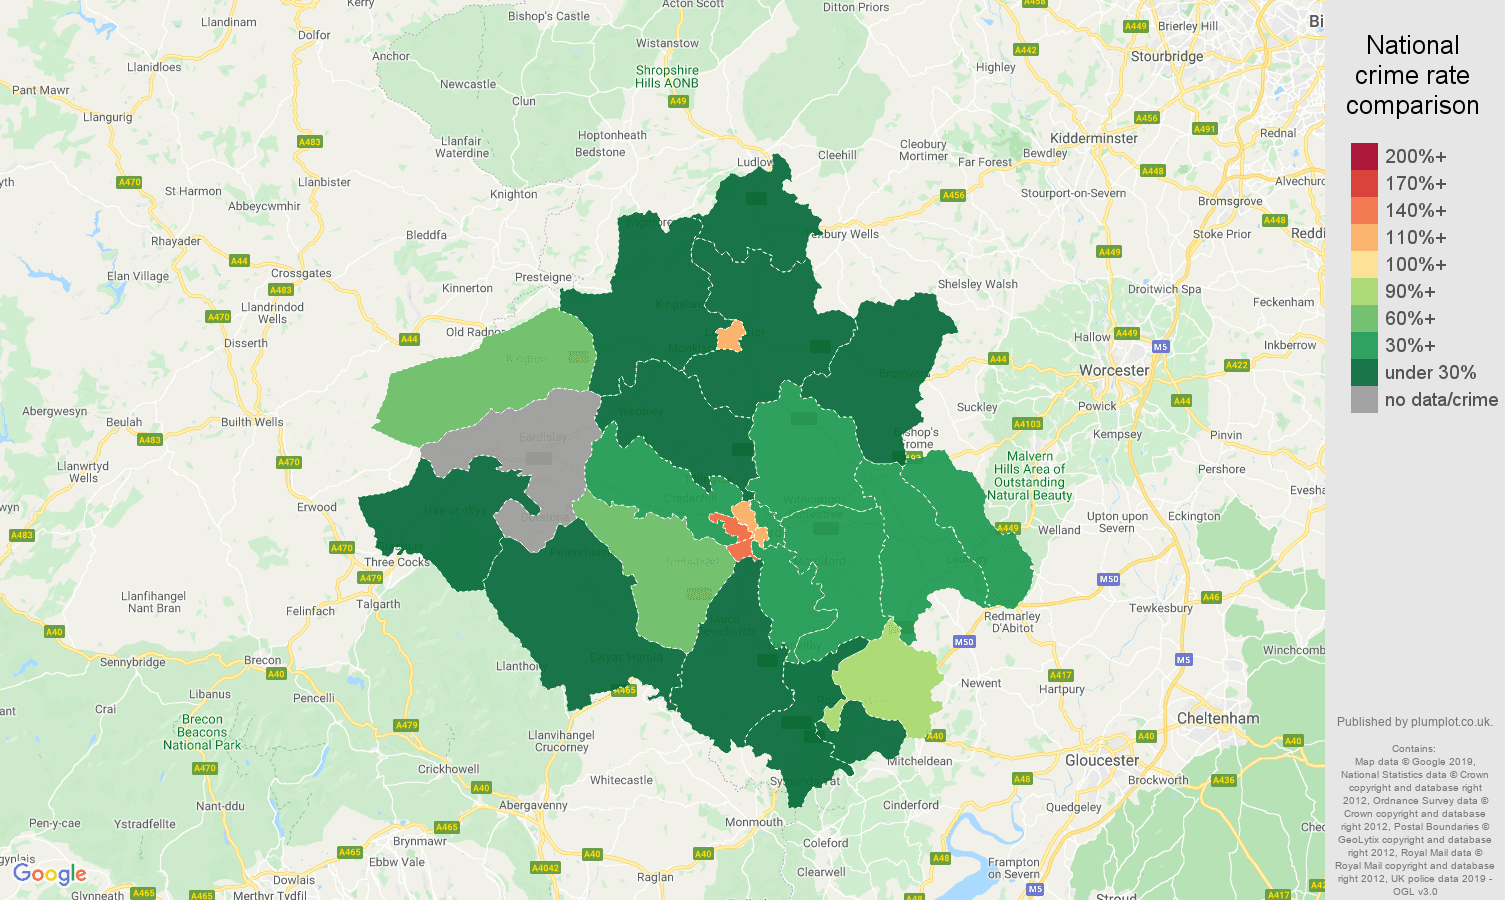 Herefordshire other crime rate comparison map